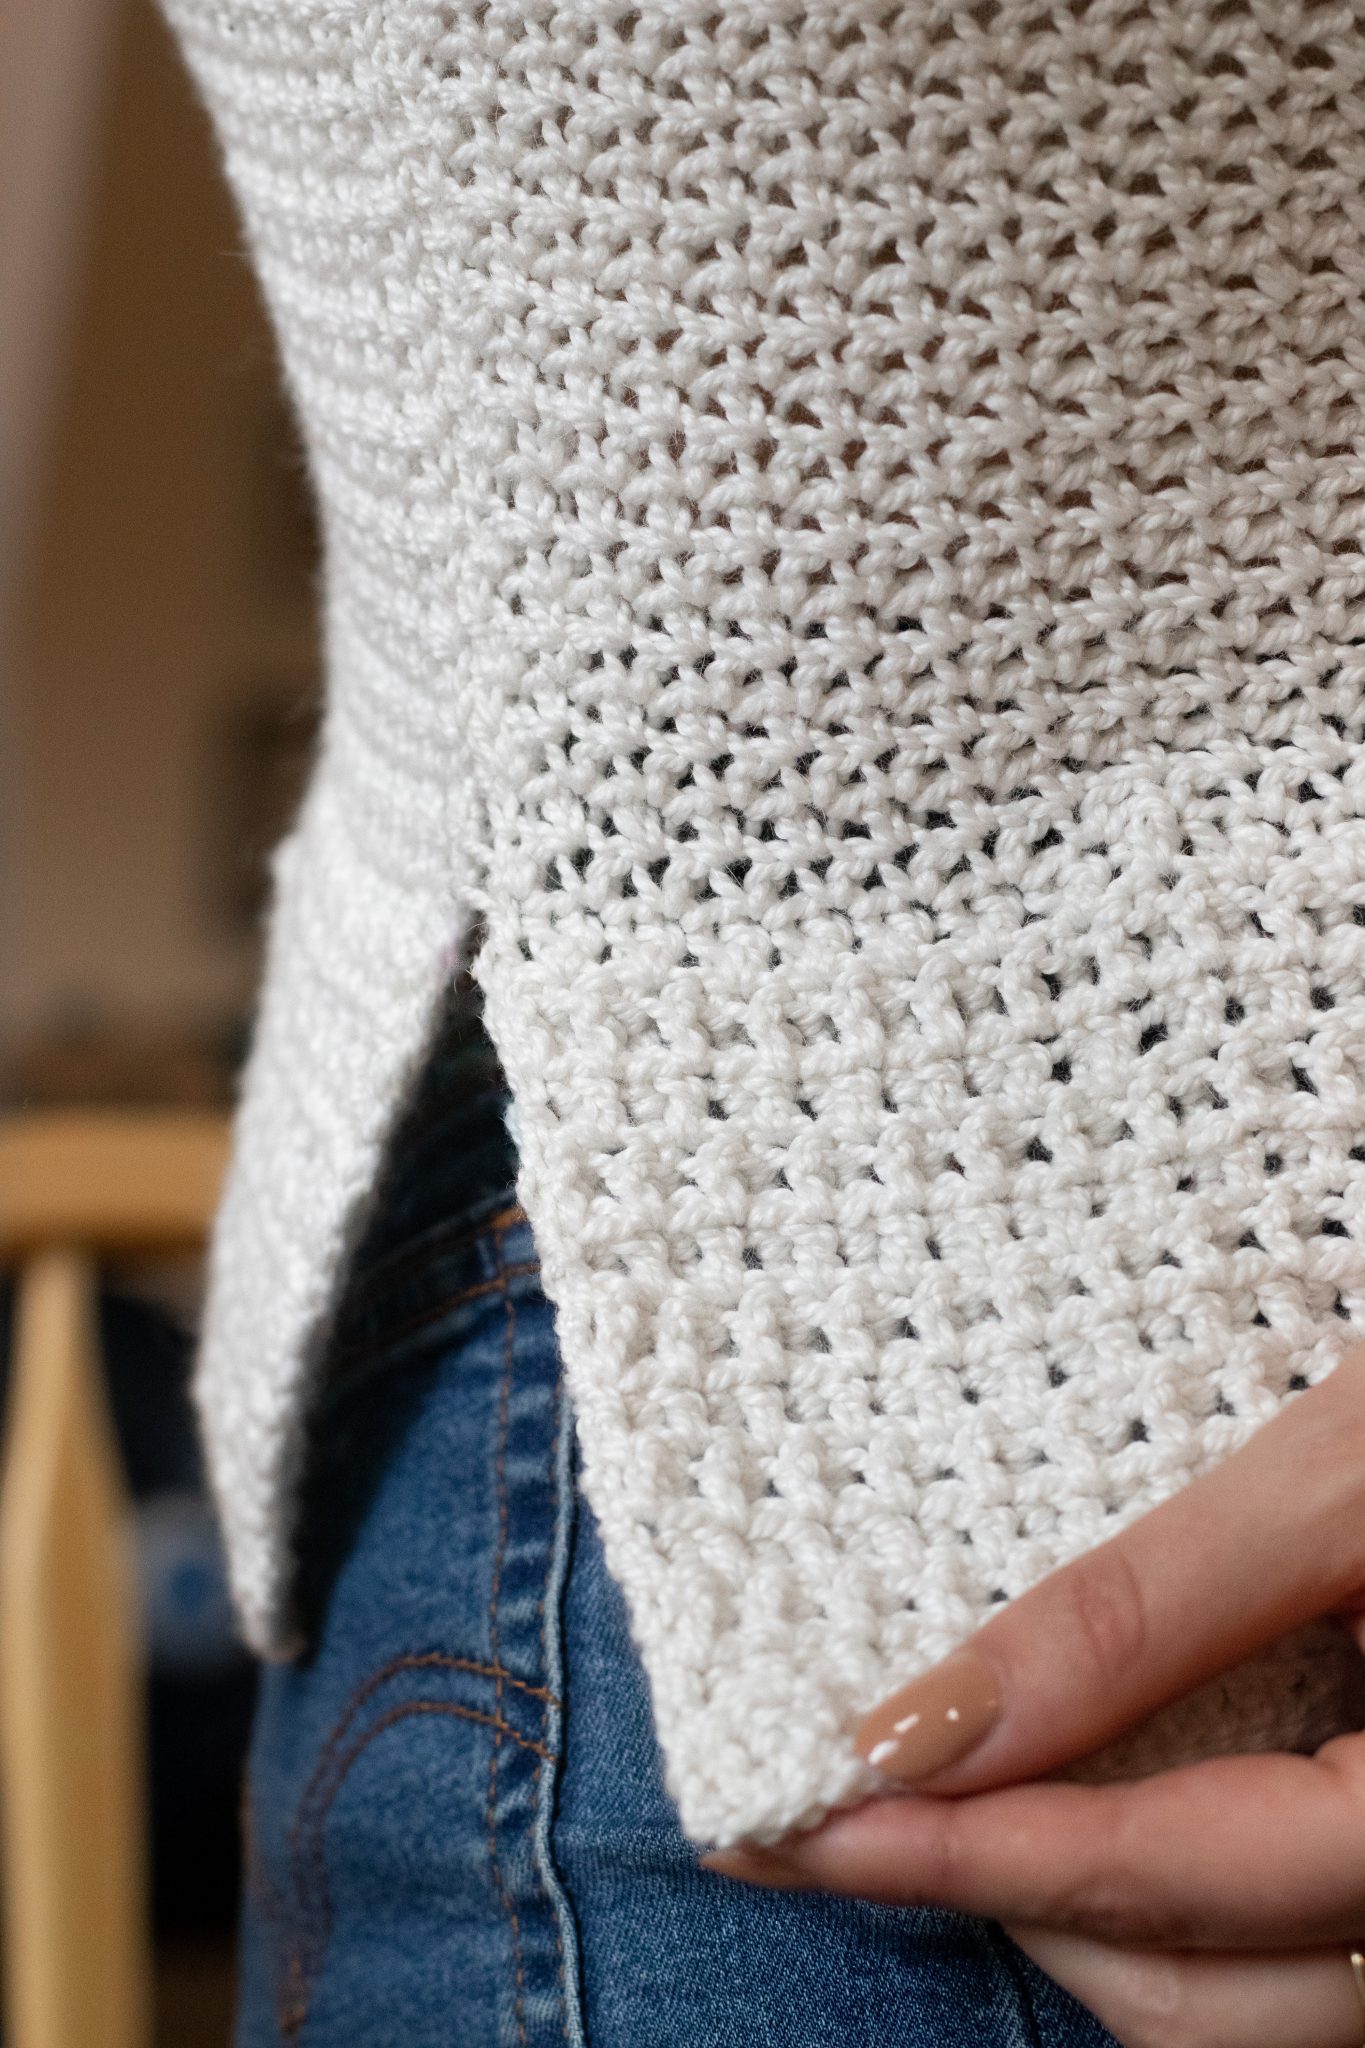 Teulon Tank – FREE Crochet Pattern for Textured, Sleeveless Top with ...